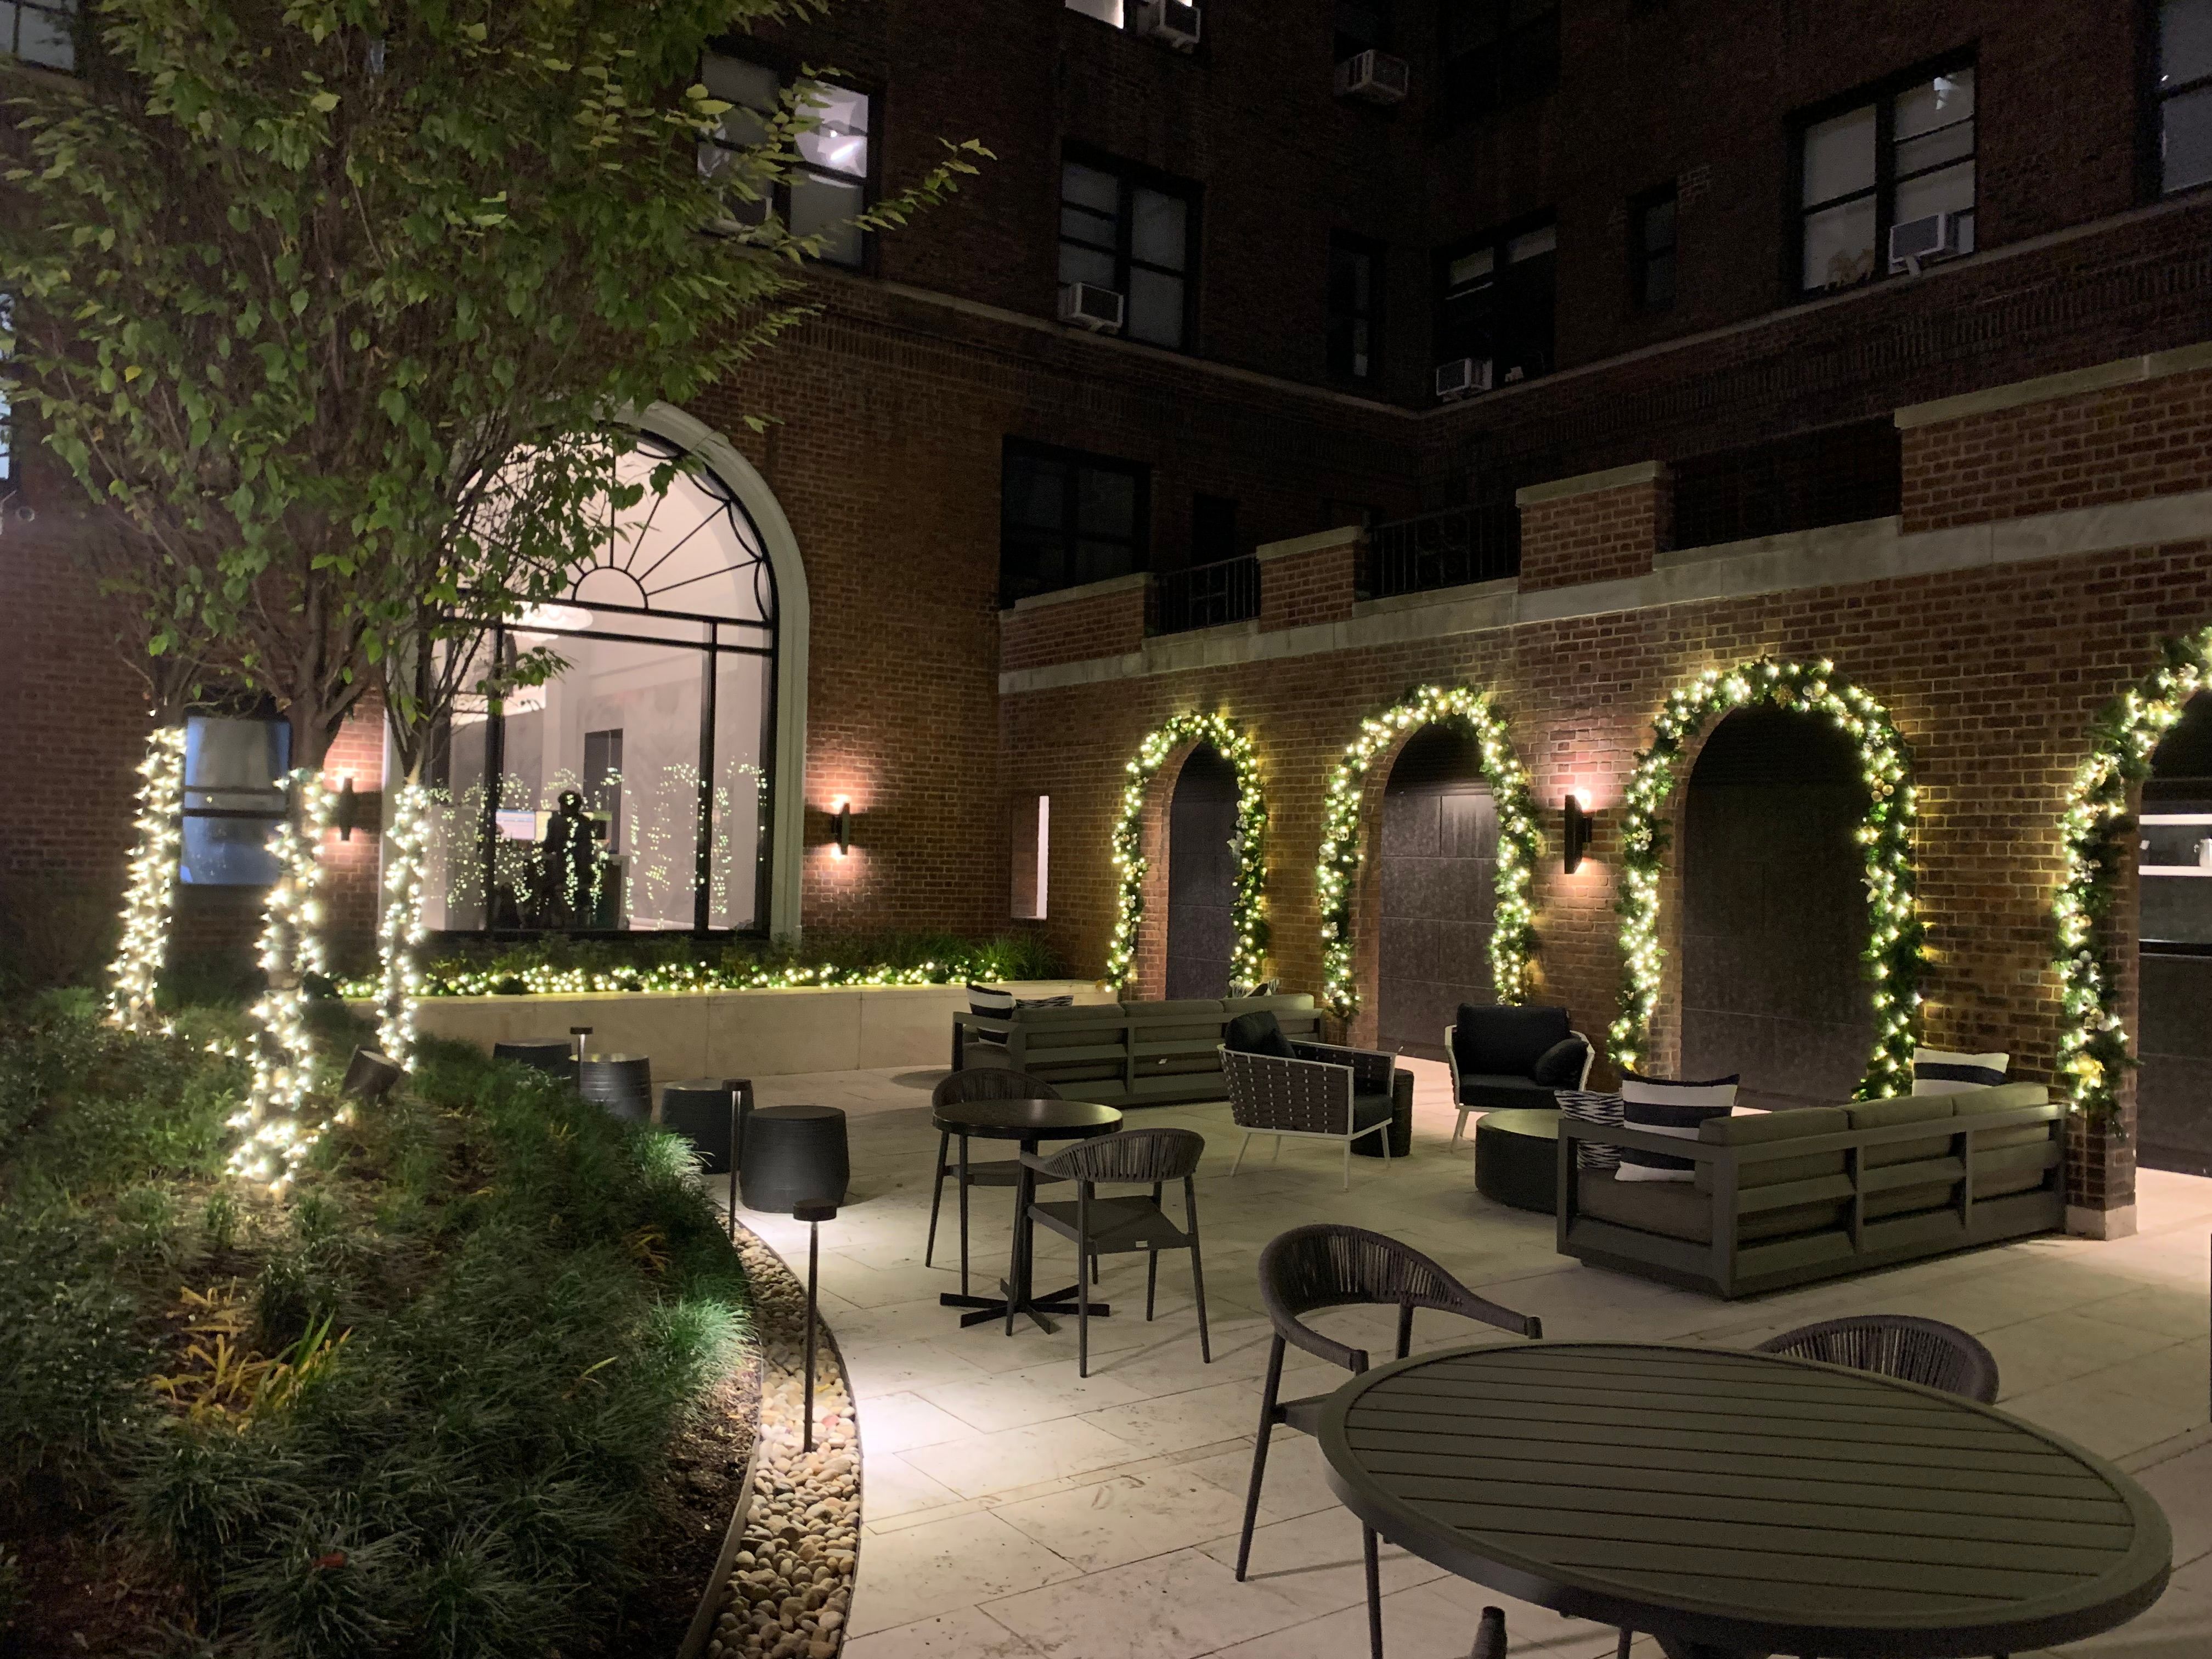 Building lobby courtyard at night